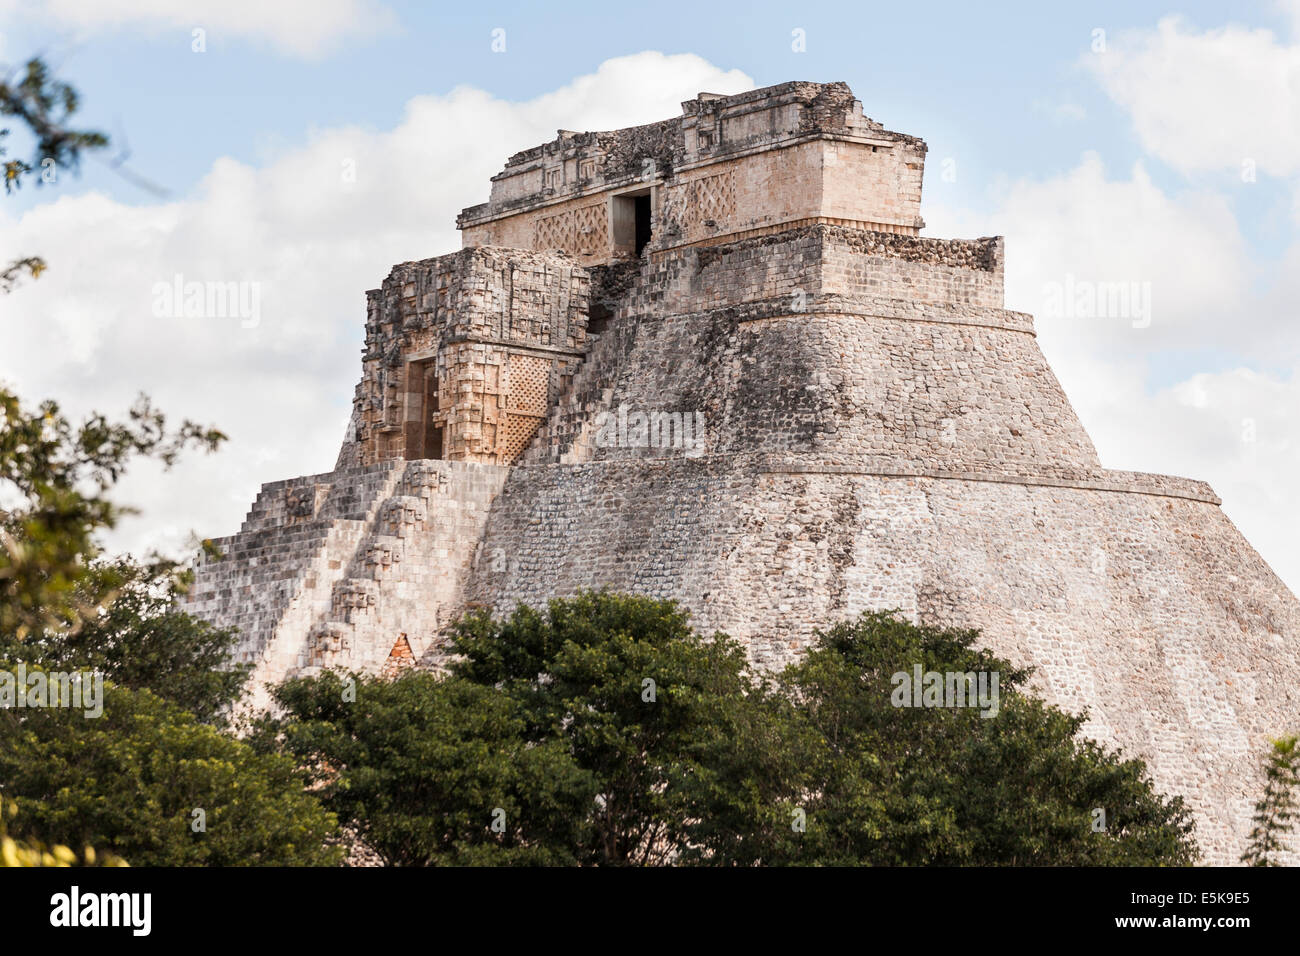 Uxmal's Mayan Pyramid of the Magician rises above the trees. The massive stone structure rises majestically. Stock Photo